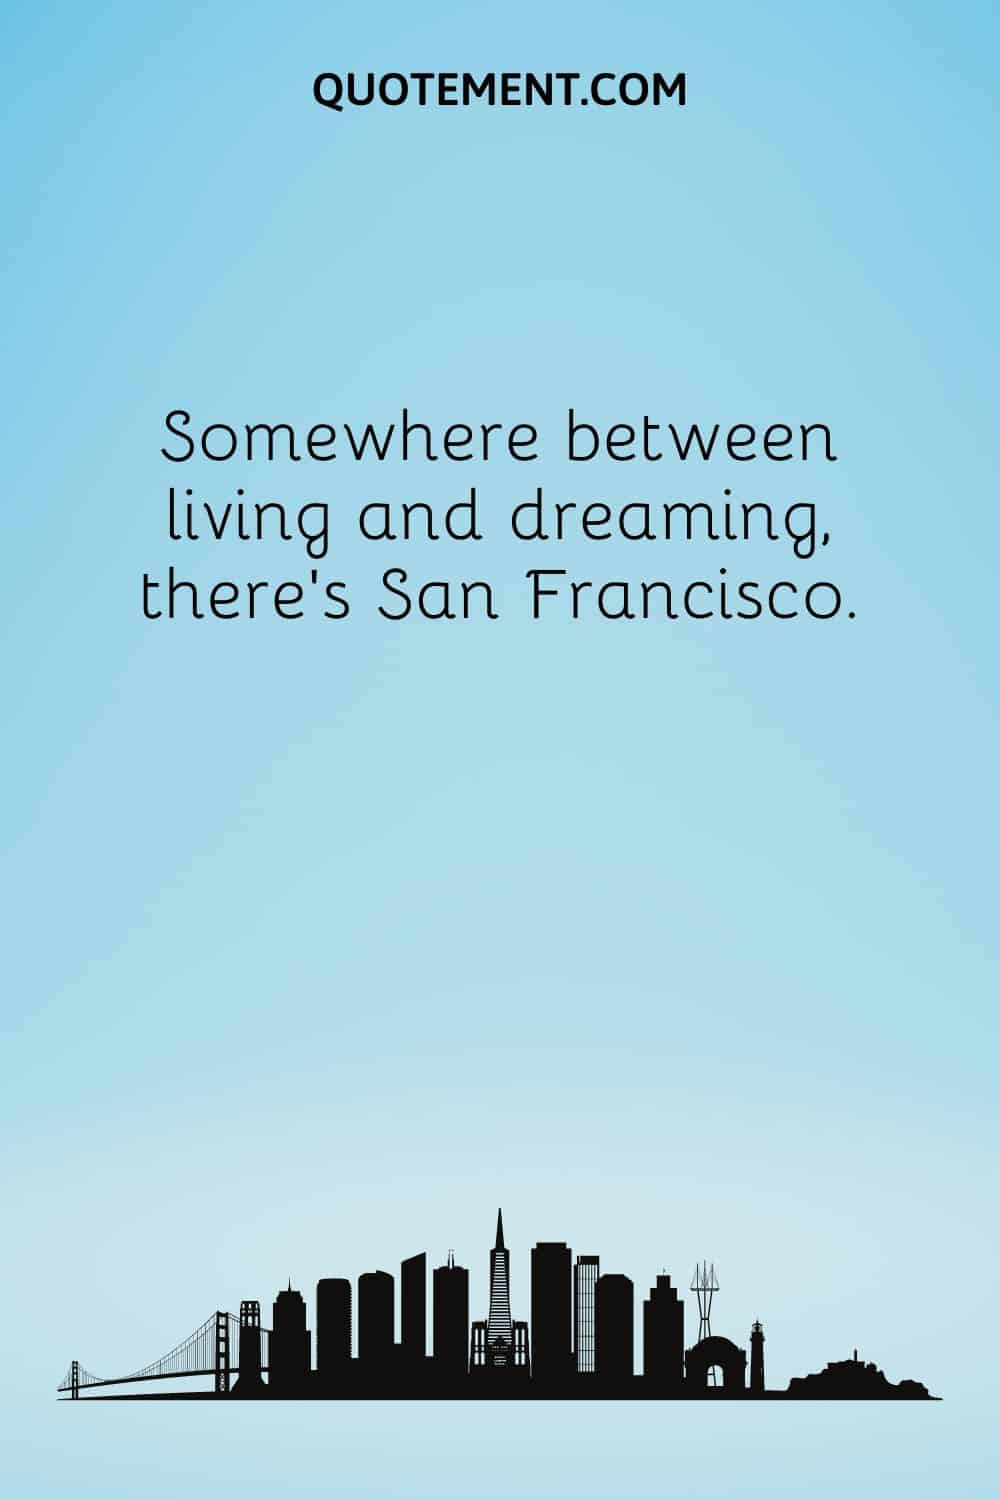 Somewhere between living and dreaming, there’s San Francisco.
